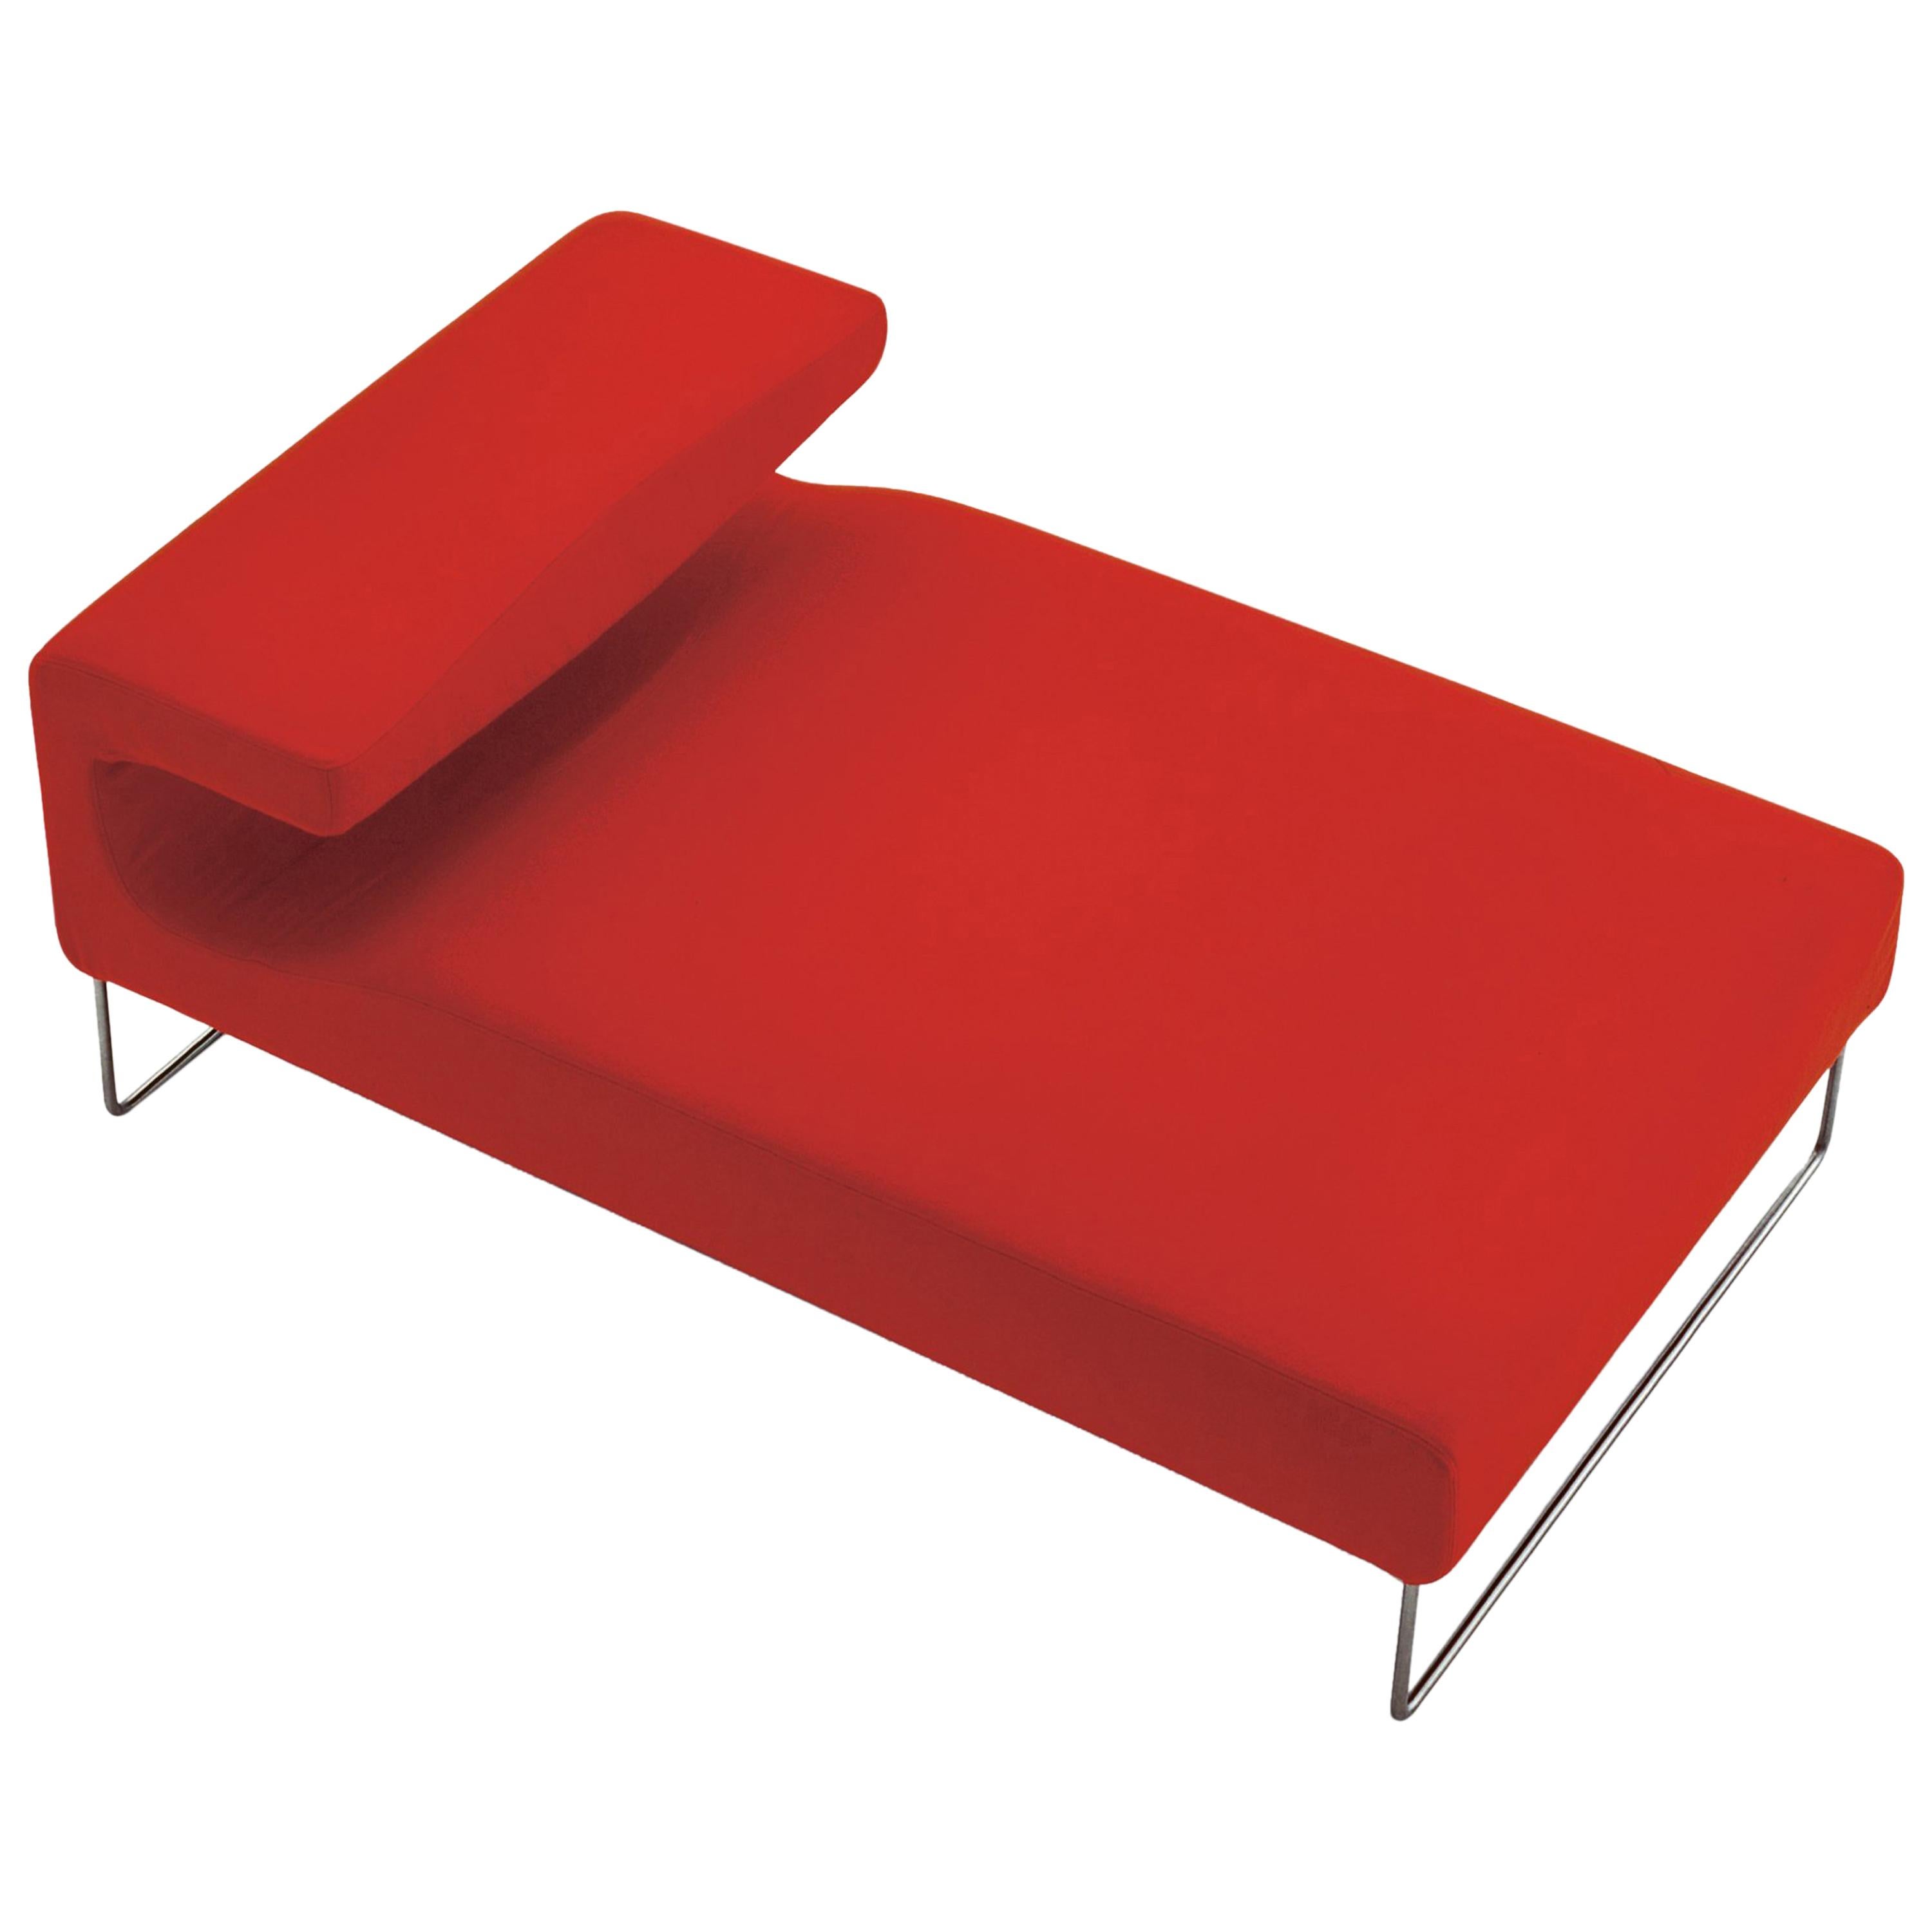 Moroso Lowseat Chaise Lounge in Red Fabric by Patricia Urquiola For Sale